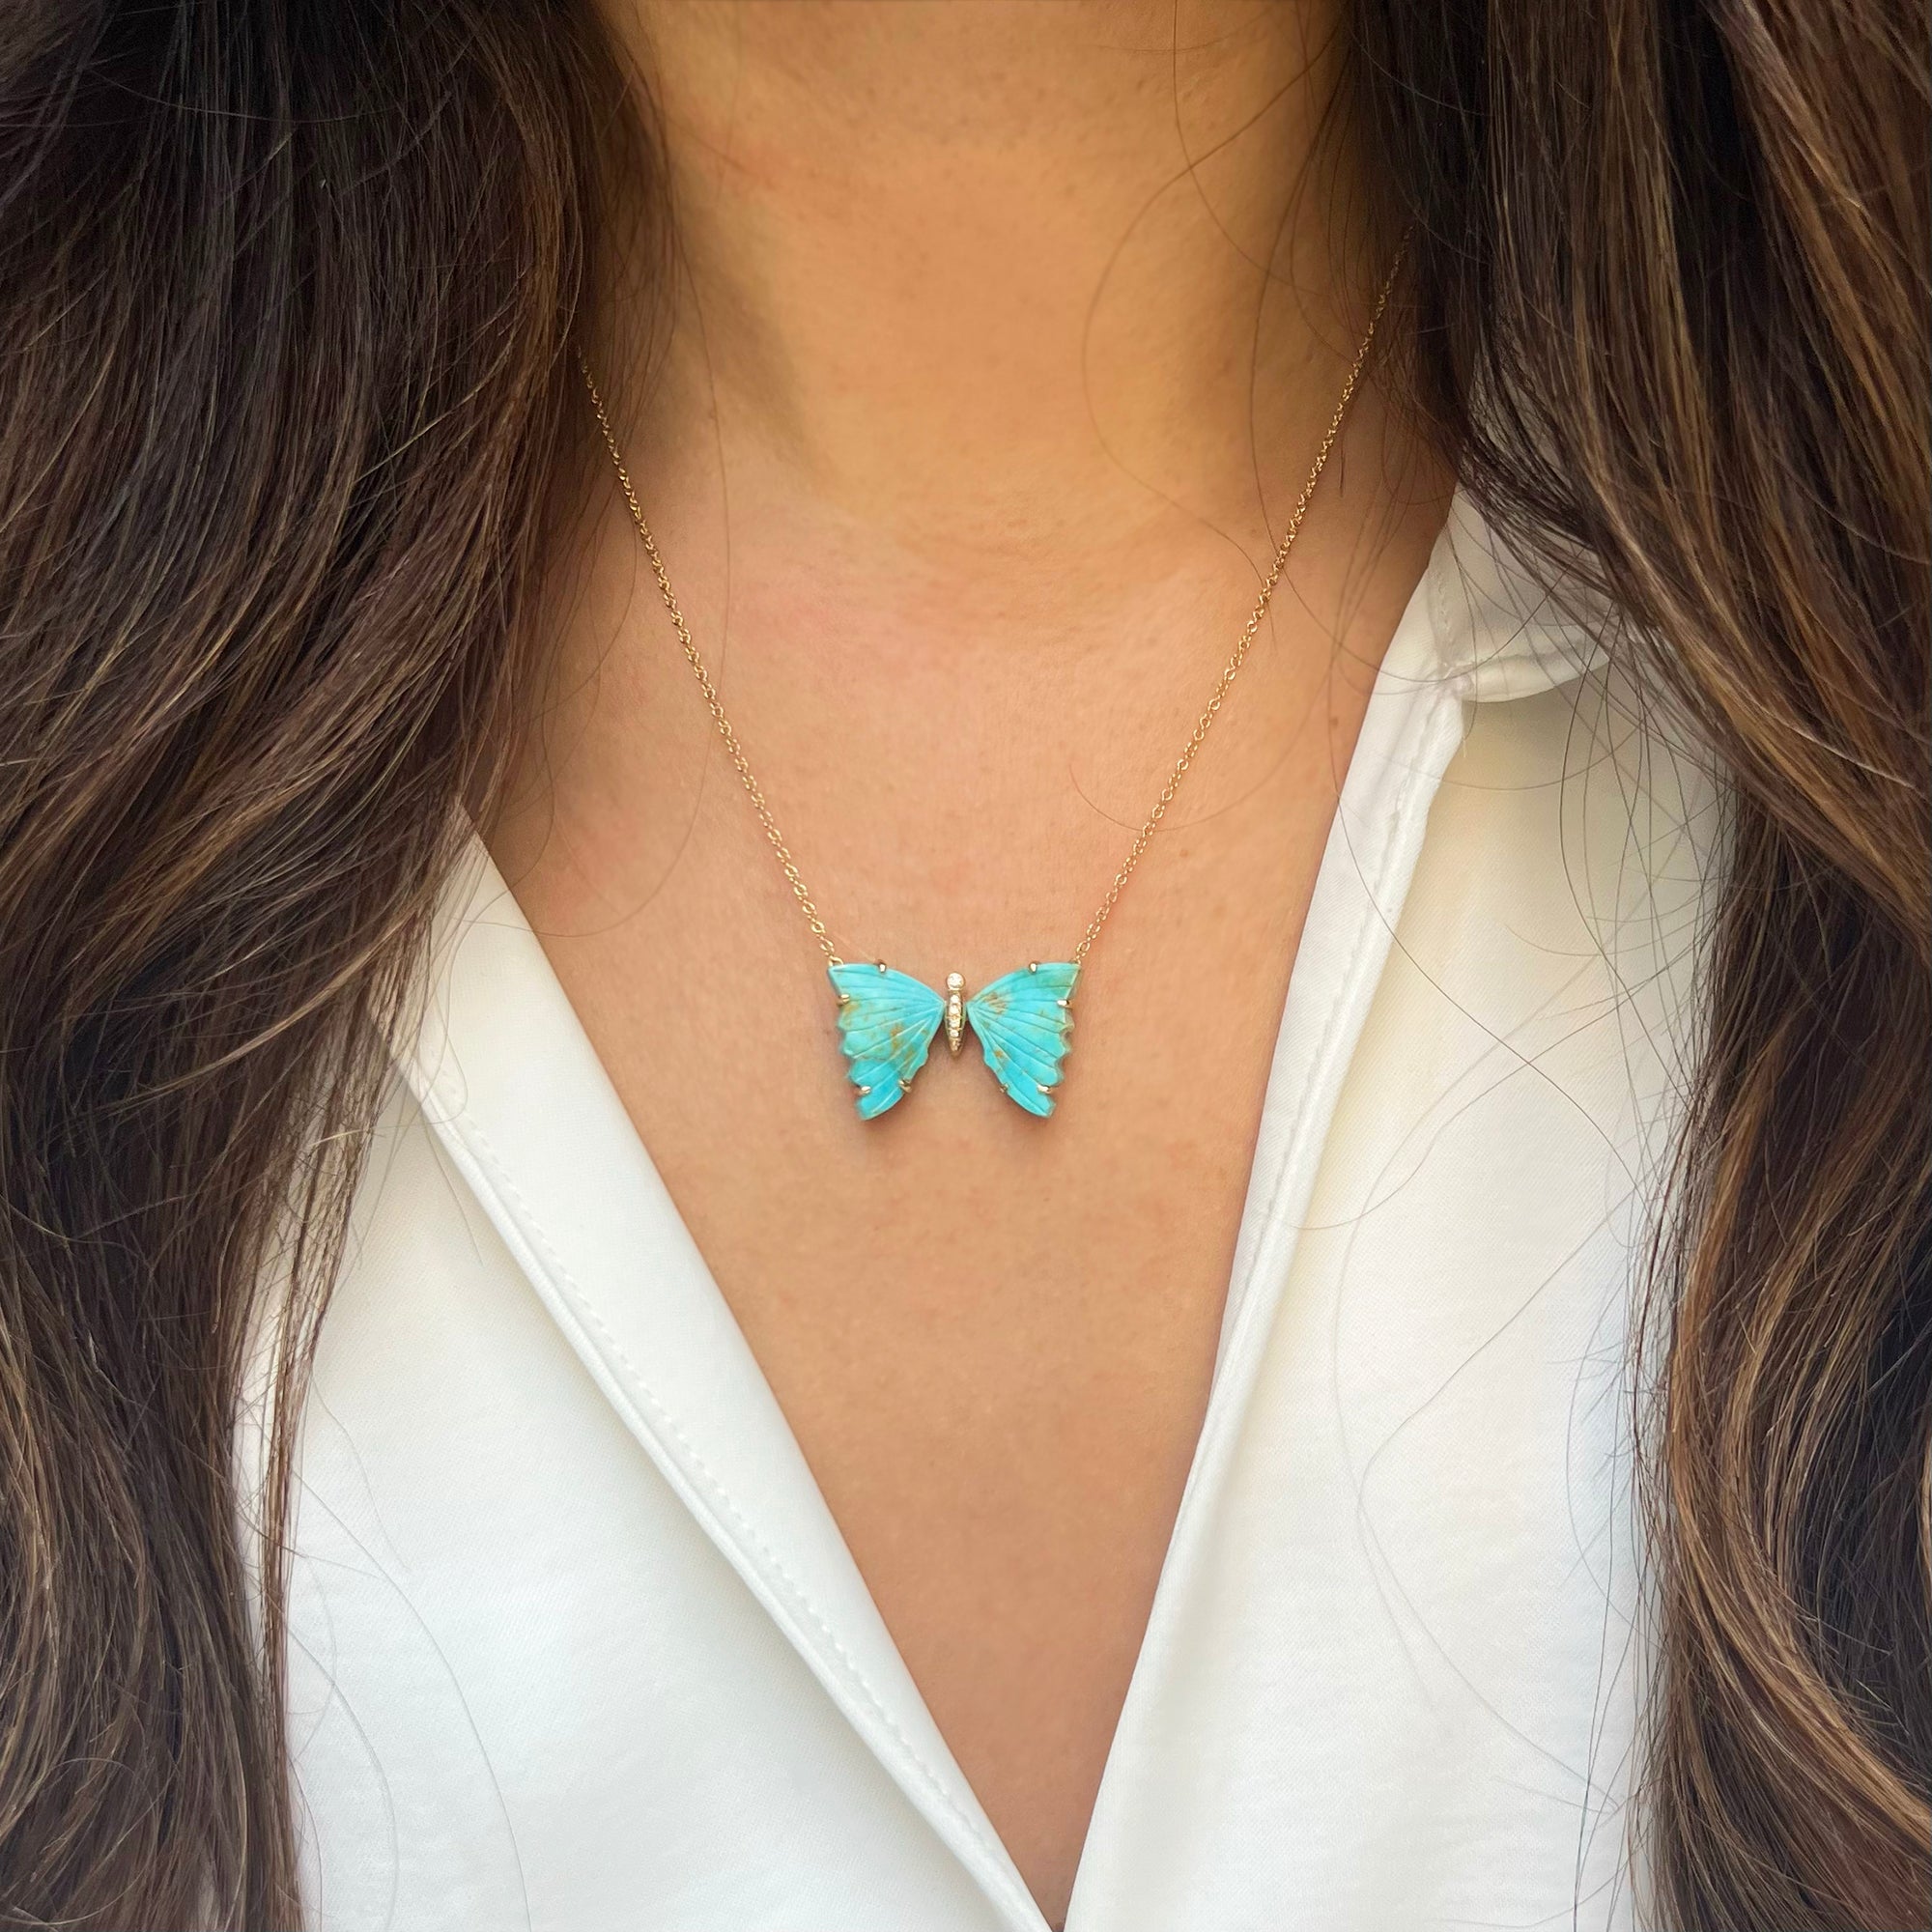 Natural Turquoise Butterfly Necklace with Prongs